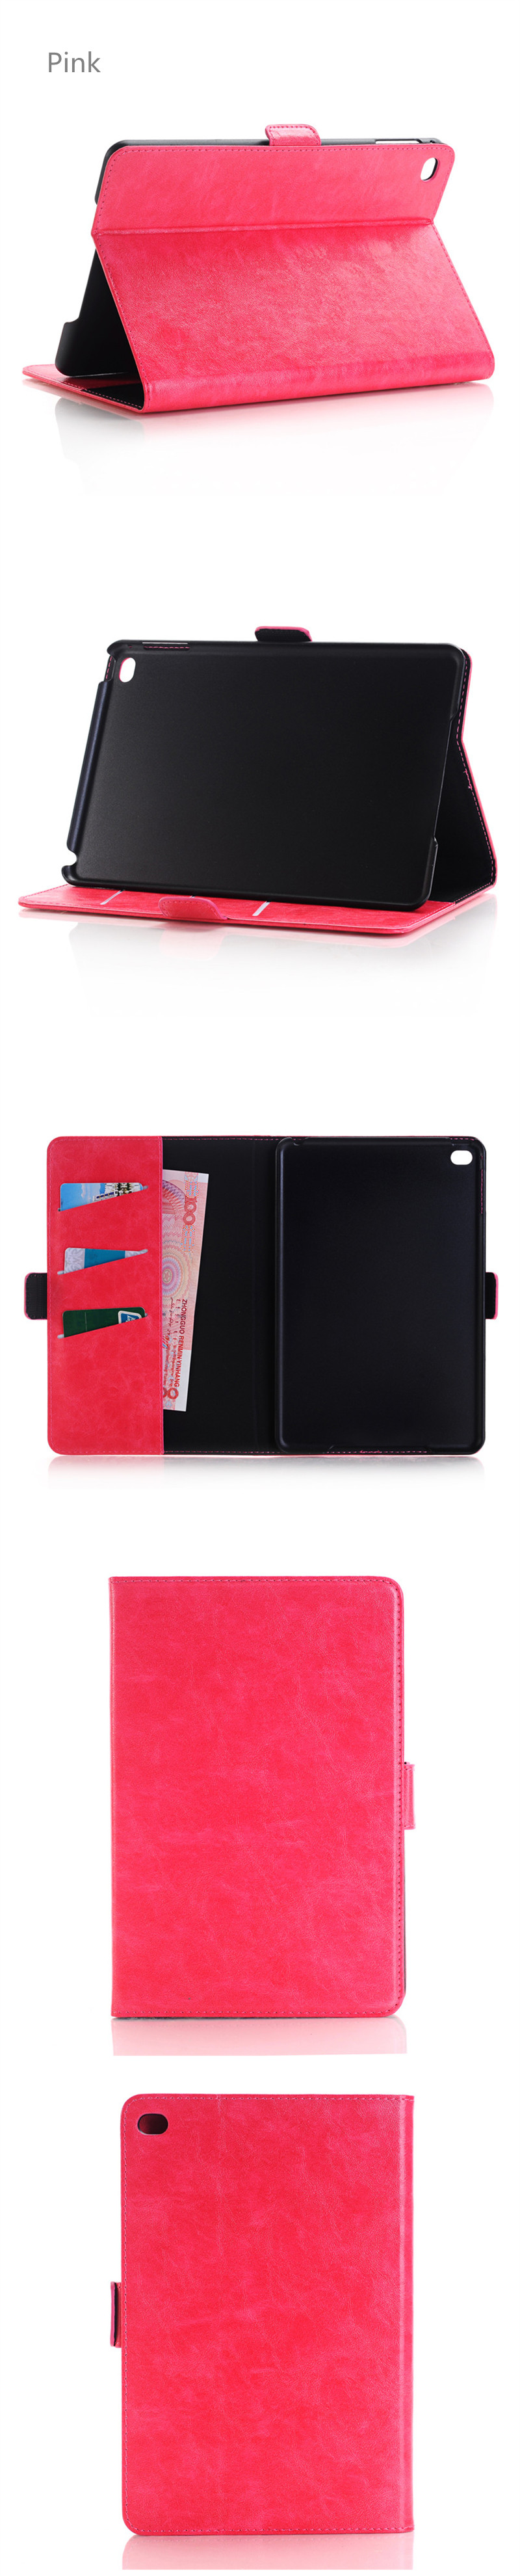 WLD-A005-Belt-Buckle-Shell-Flip-PU-Leather--Protective-Cases-For-iPad-Mini-4-1013508-7